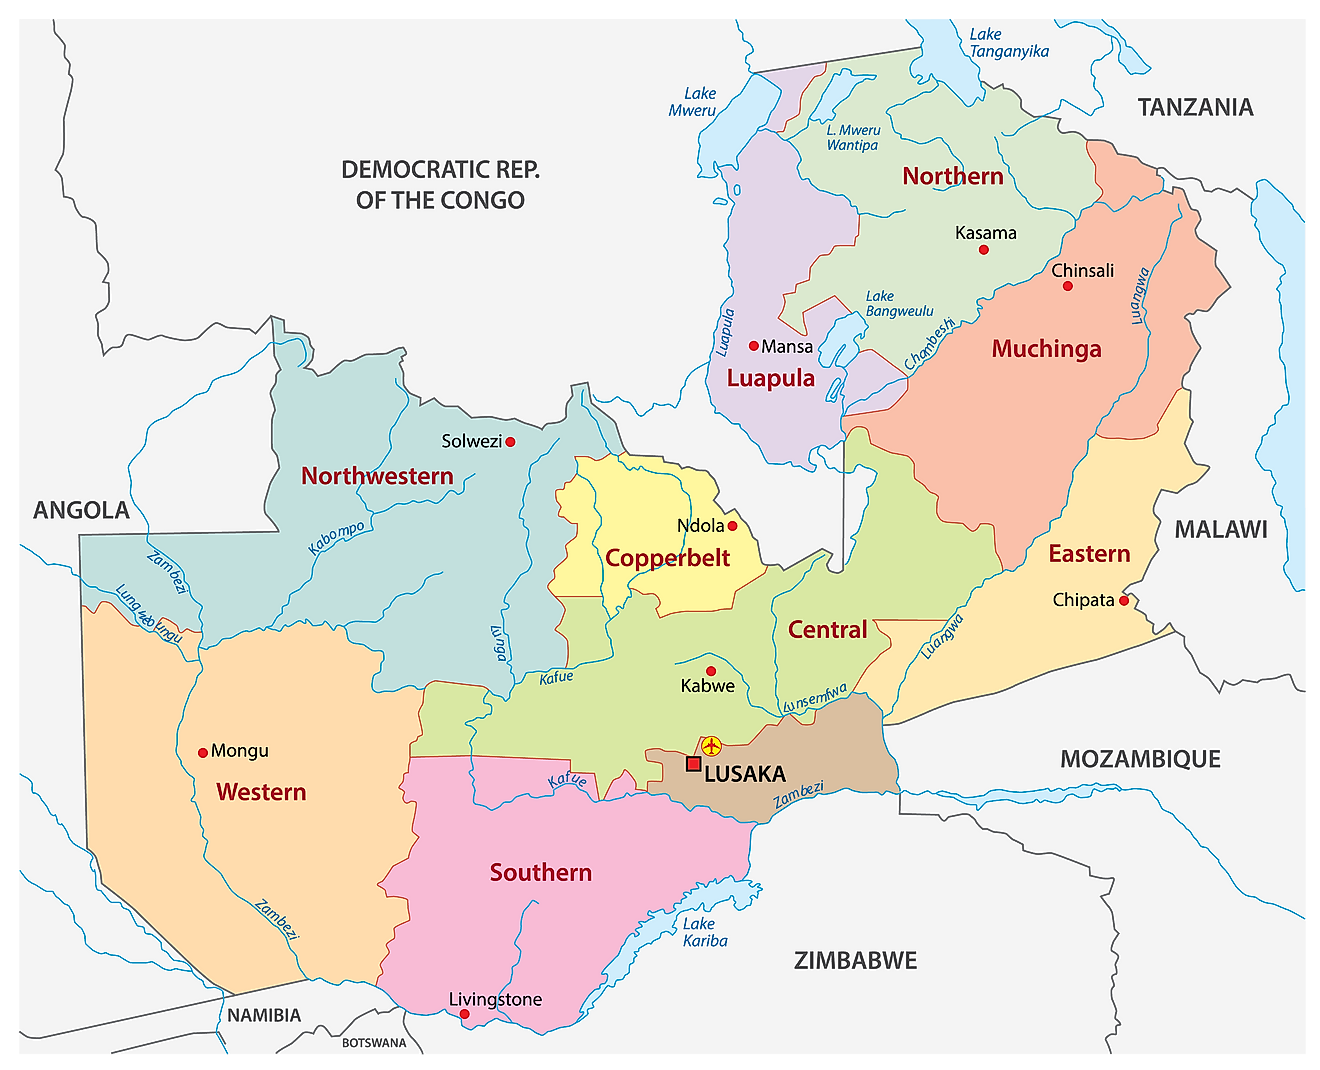 Political Map of Zambia displaying the 10 provinces of the country, their capital cities, and the national capital of Lusaka.